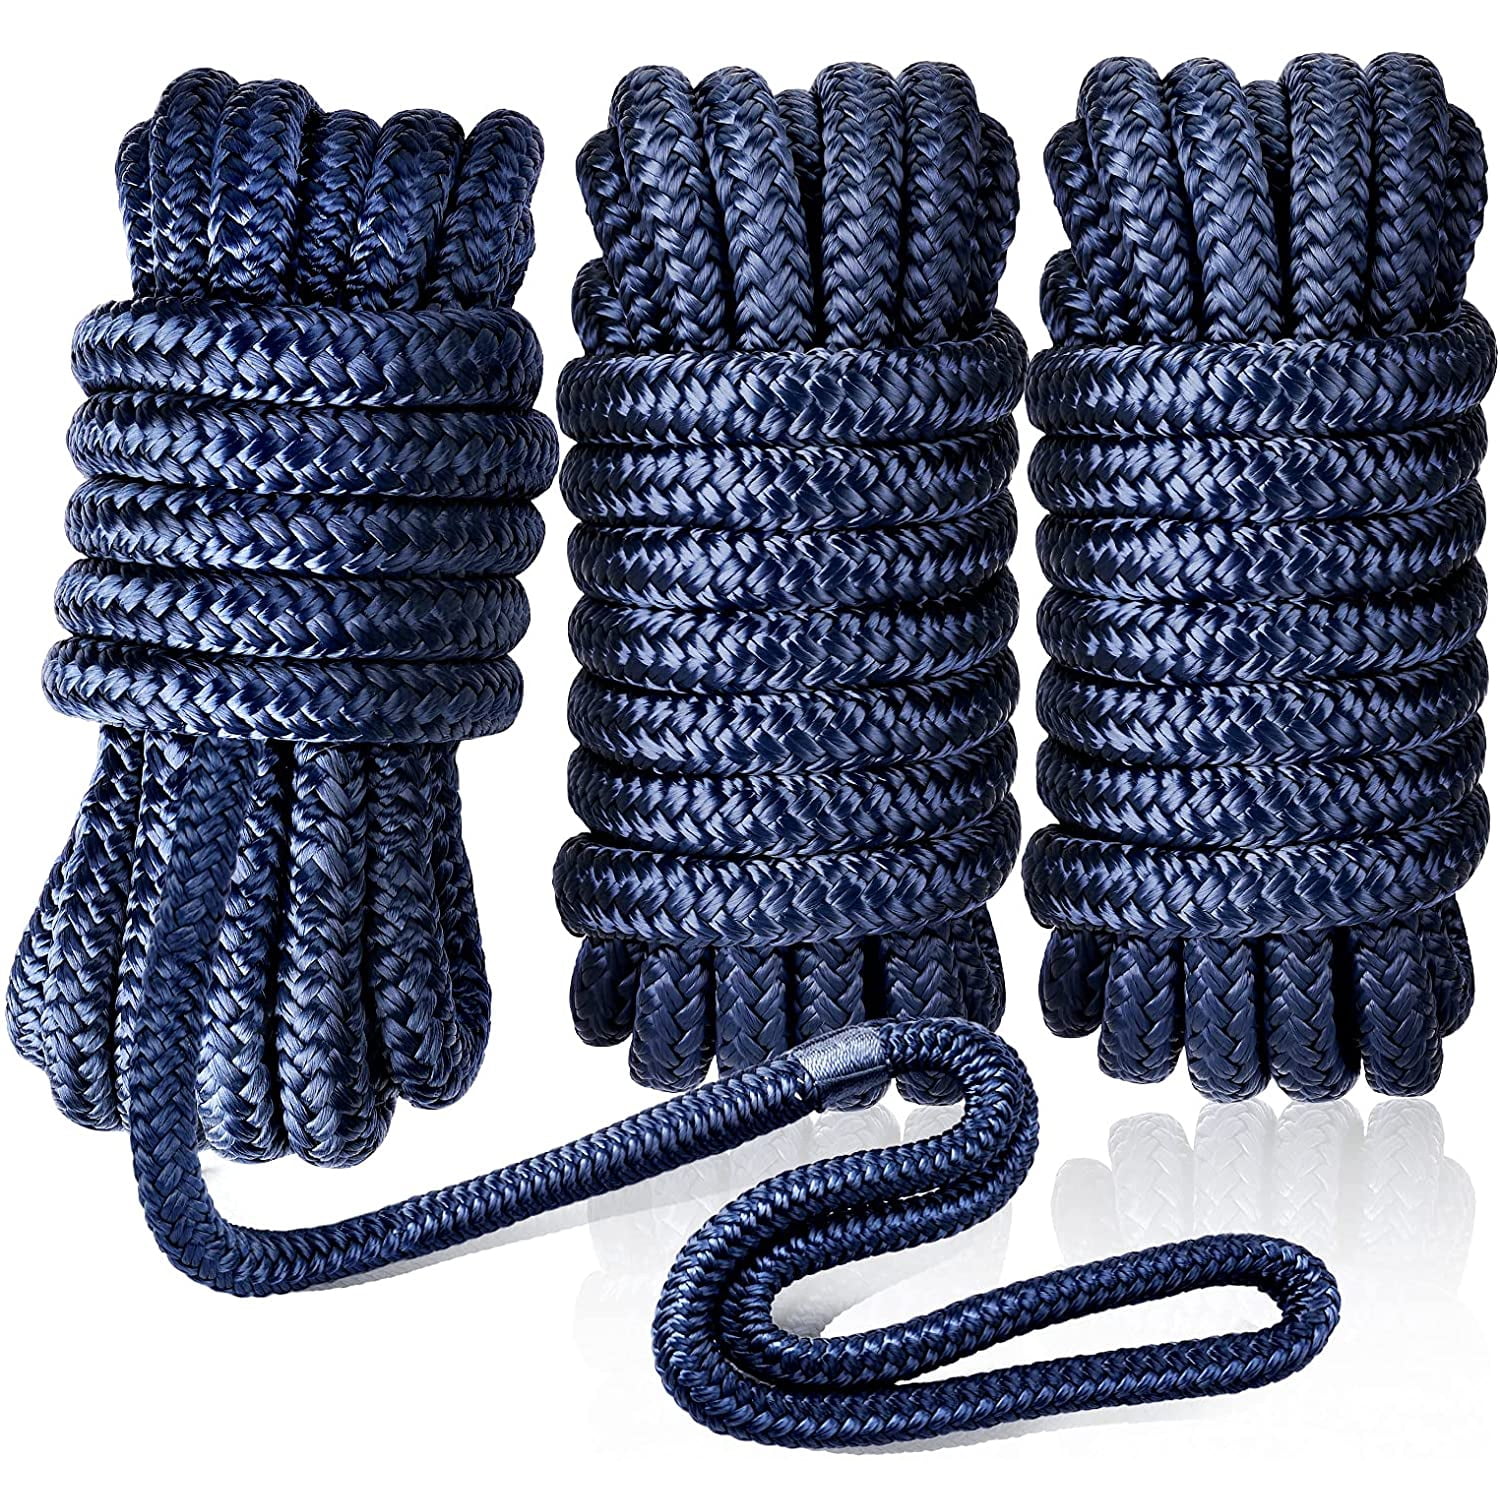 Sports Outdoors Boat Dock Lines Rope